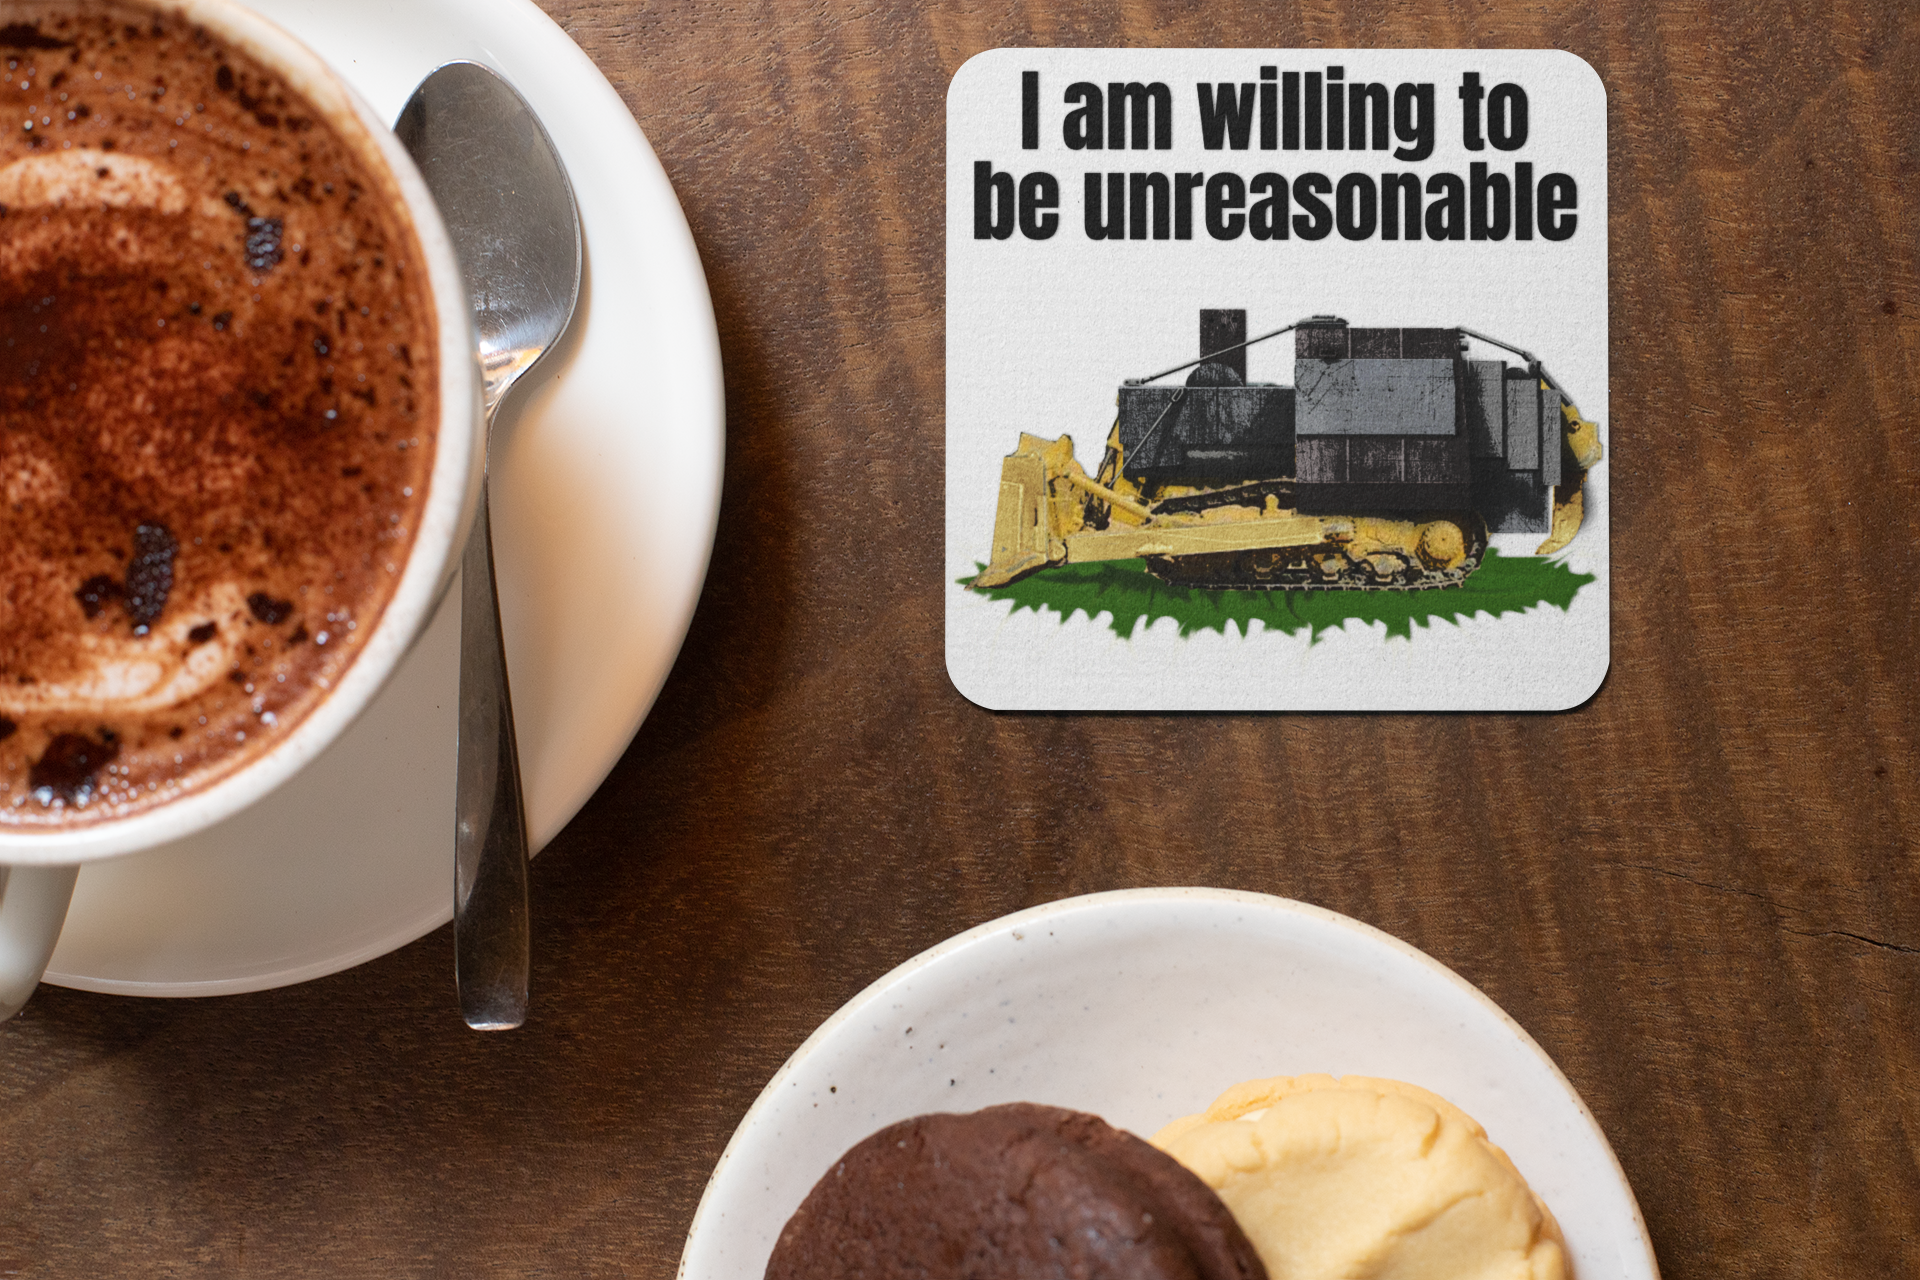 I am willing to be unreasonable - Drink coaster American Made birthday gift boyfriend gift Christmas gift co-worker gift coaster coaster set coworker gift dads day gift fiance gift gadsden gift for boyfriend gift for dad gift for grandpa gift for her gift for him gift for husband gift for mom gift for sister gift for wife gift idea girlfriend gift Husband Gift killdozer Made In America made in USA moms gift mothers day gift Unique gift wife gift